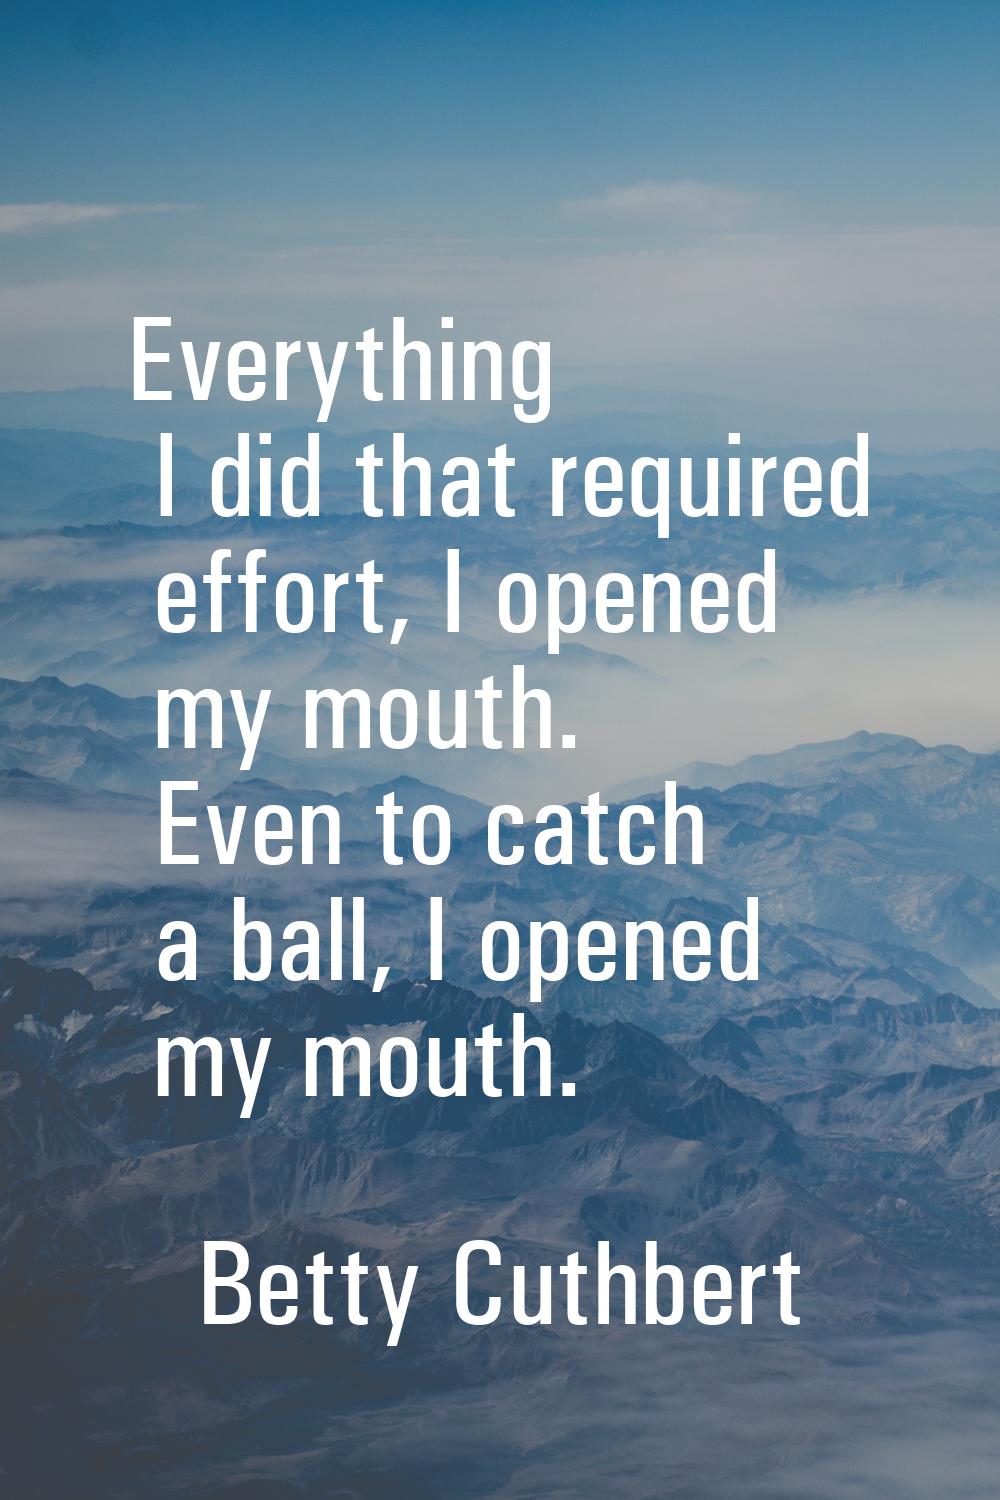 Everything I did that required effort, I opened my mouth. Even to catch a ball, I opened my mouth.